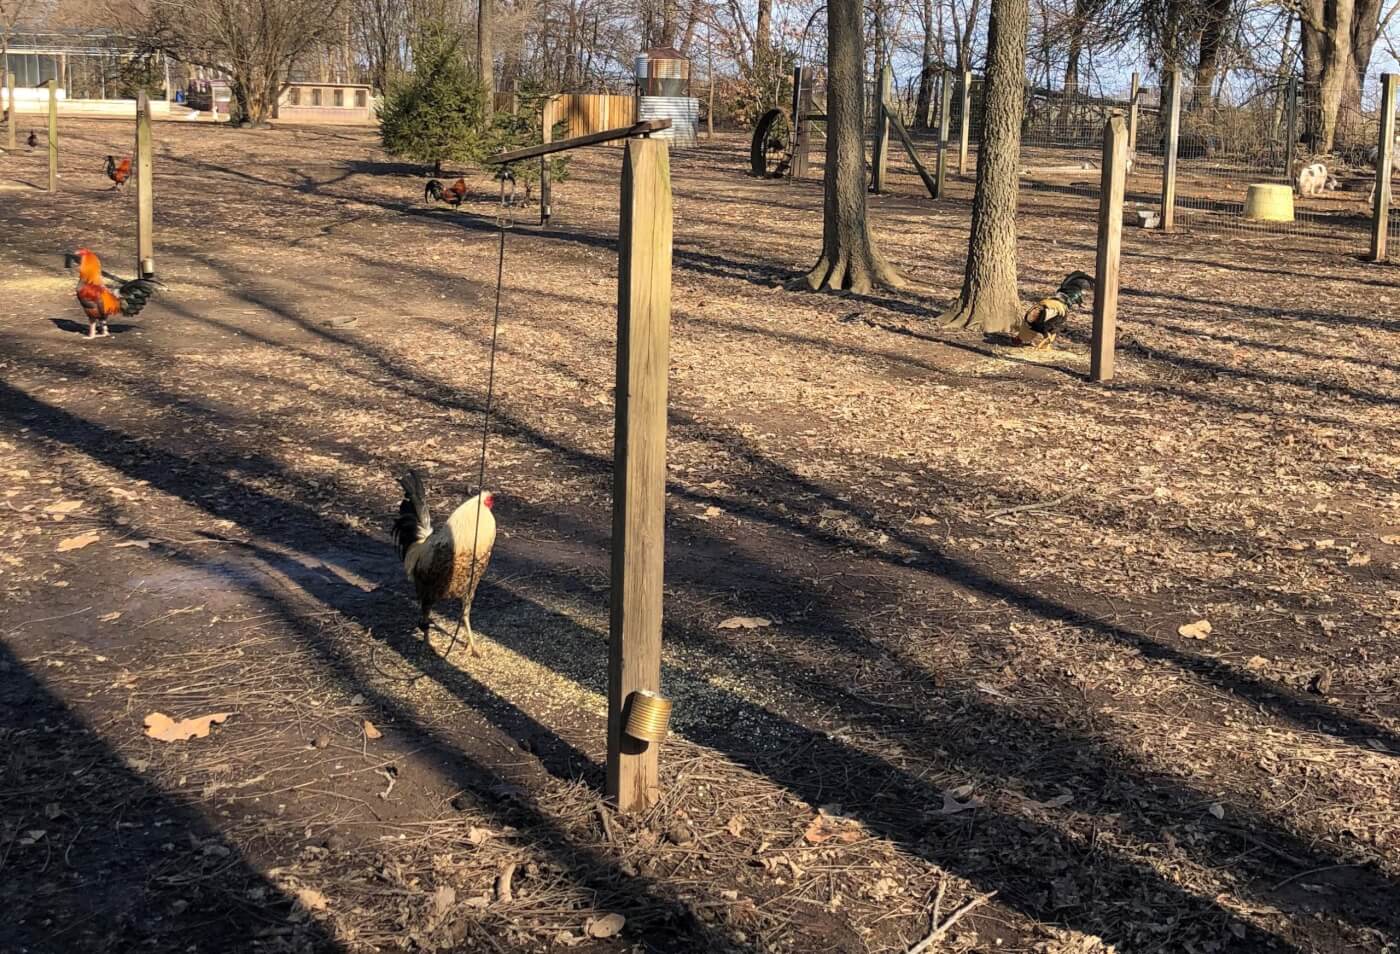 photo of wooded area with flat ground -- roosters are seen tied by thin cord to wooden stakes driven into the ground, spaced far apart. they could probably roam within a 5 foot diameter from the tether.